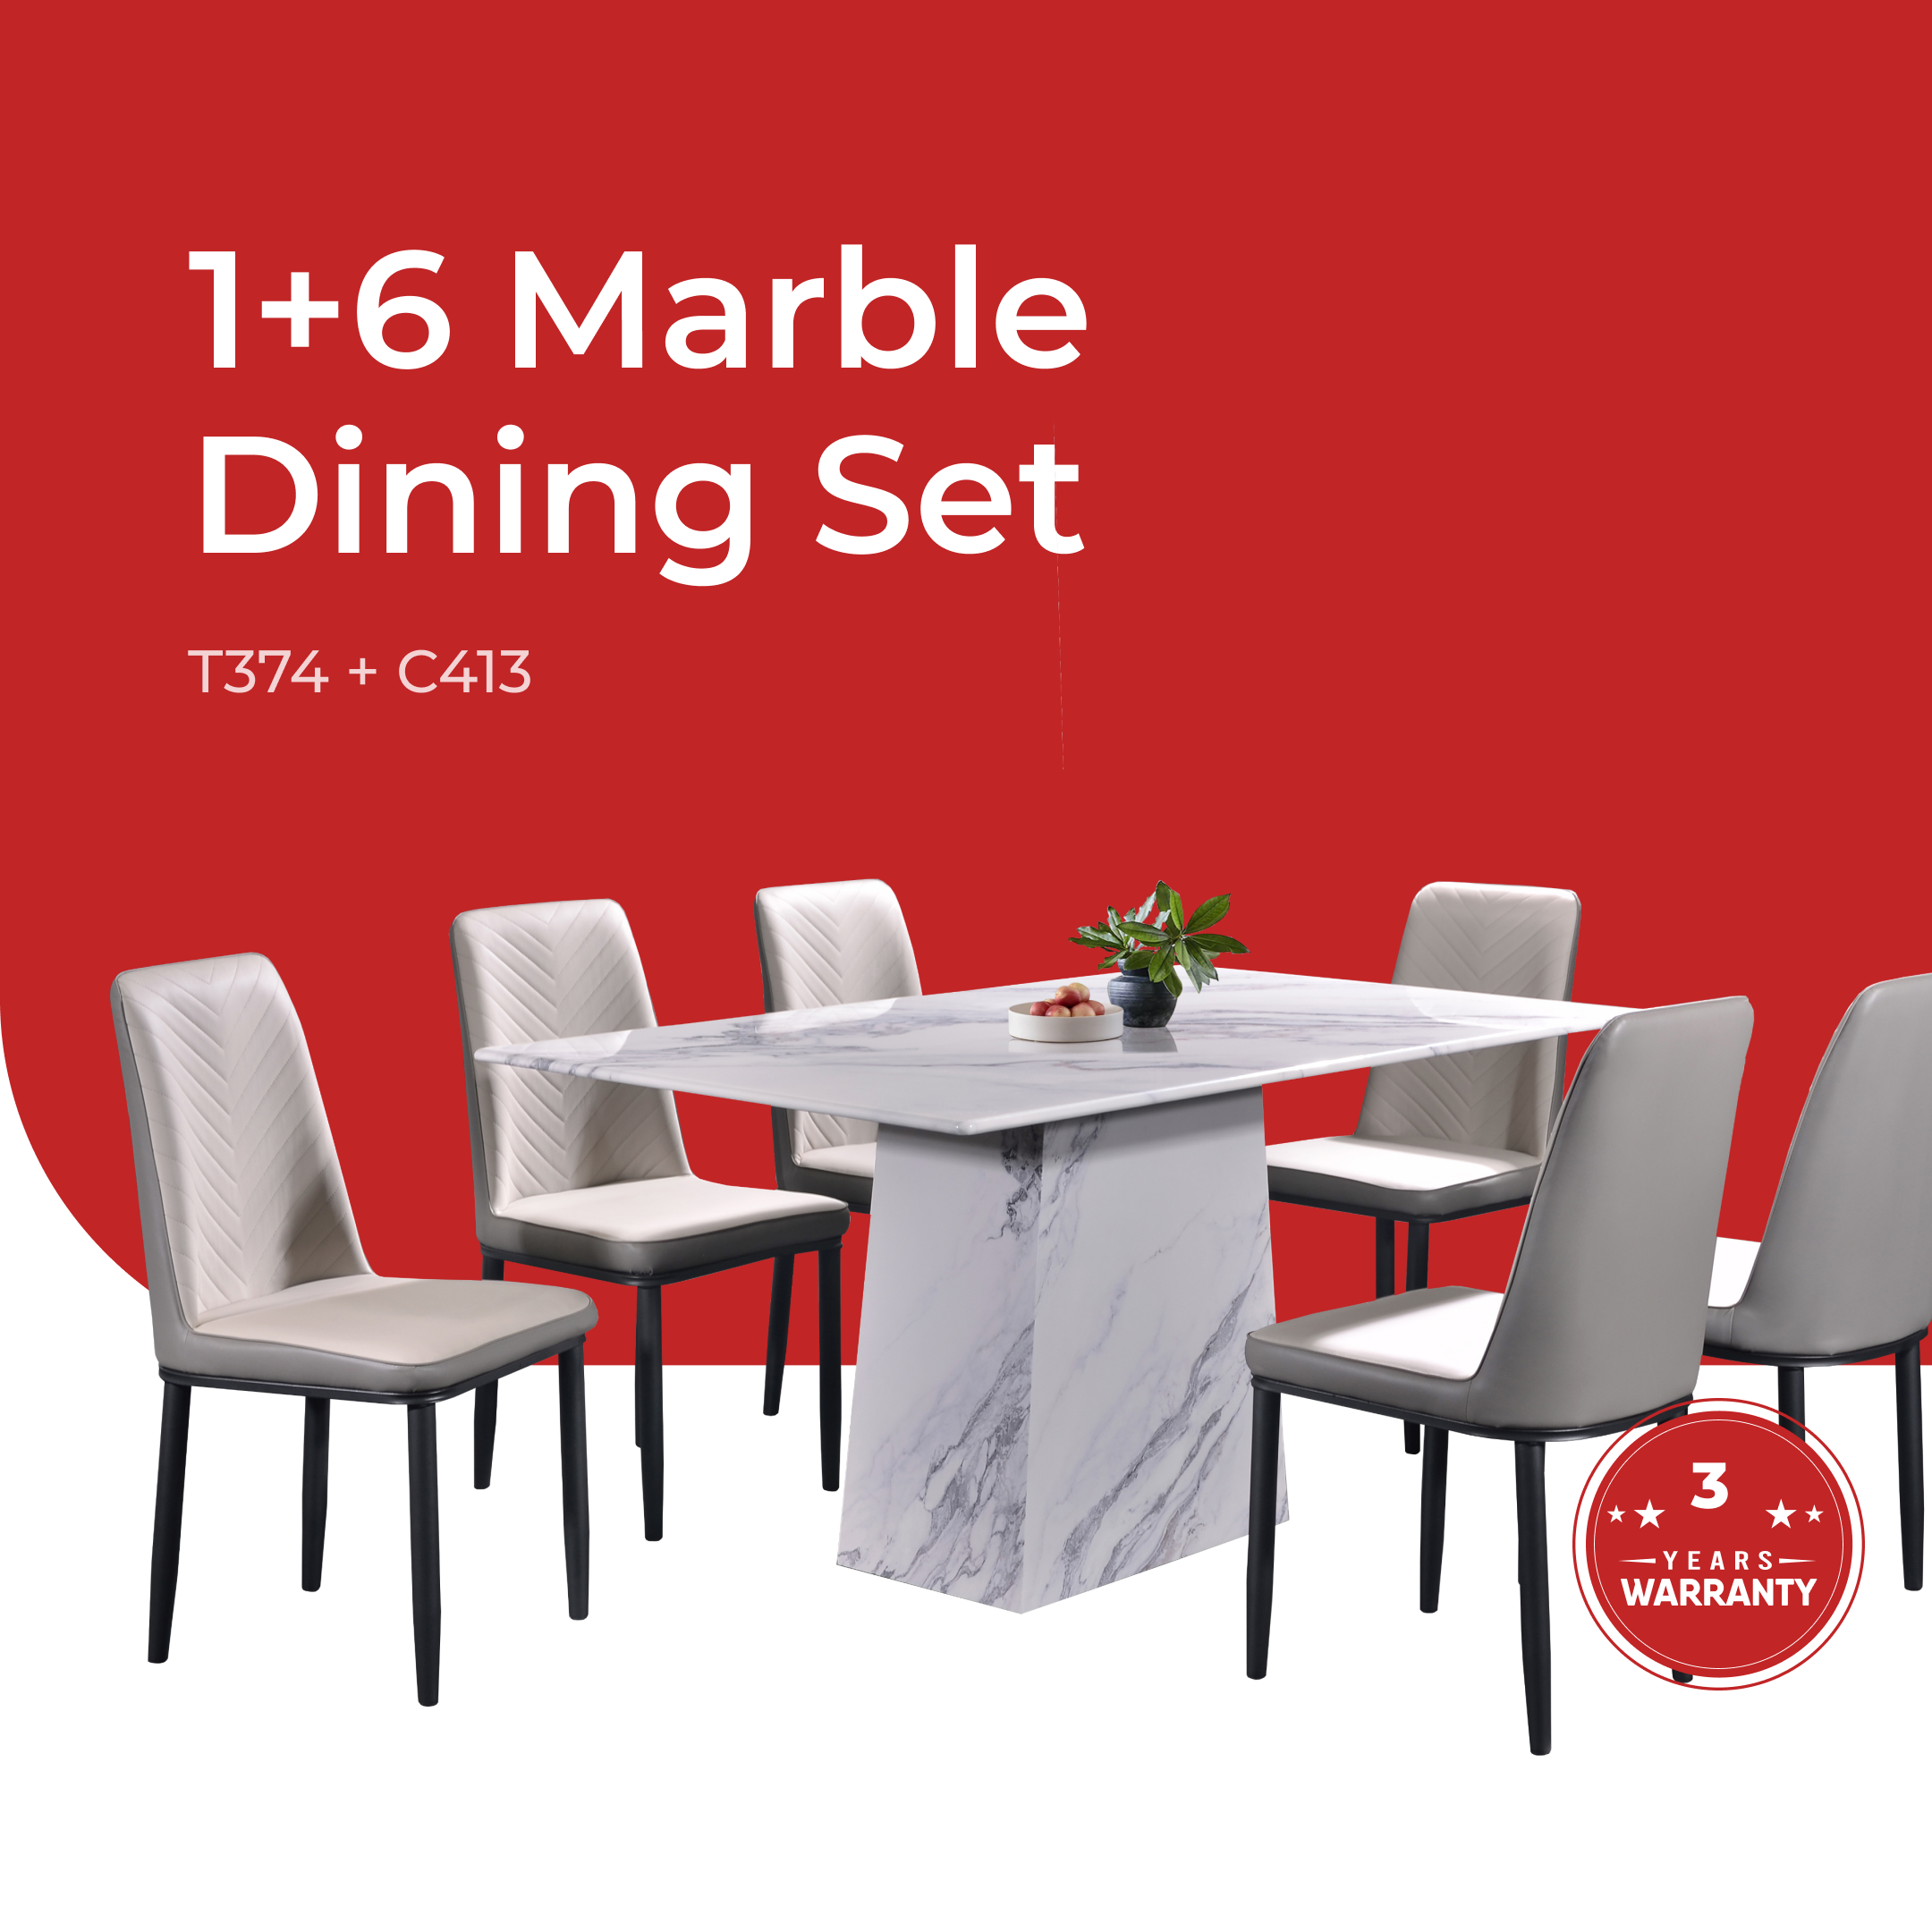 Marble Dining Set -T374+C413